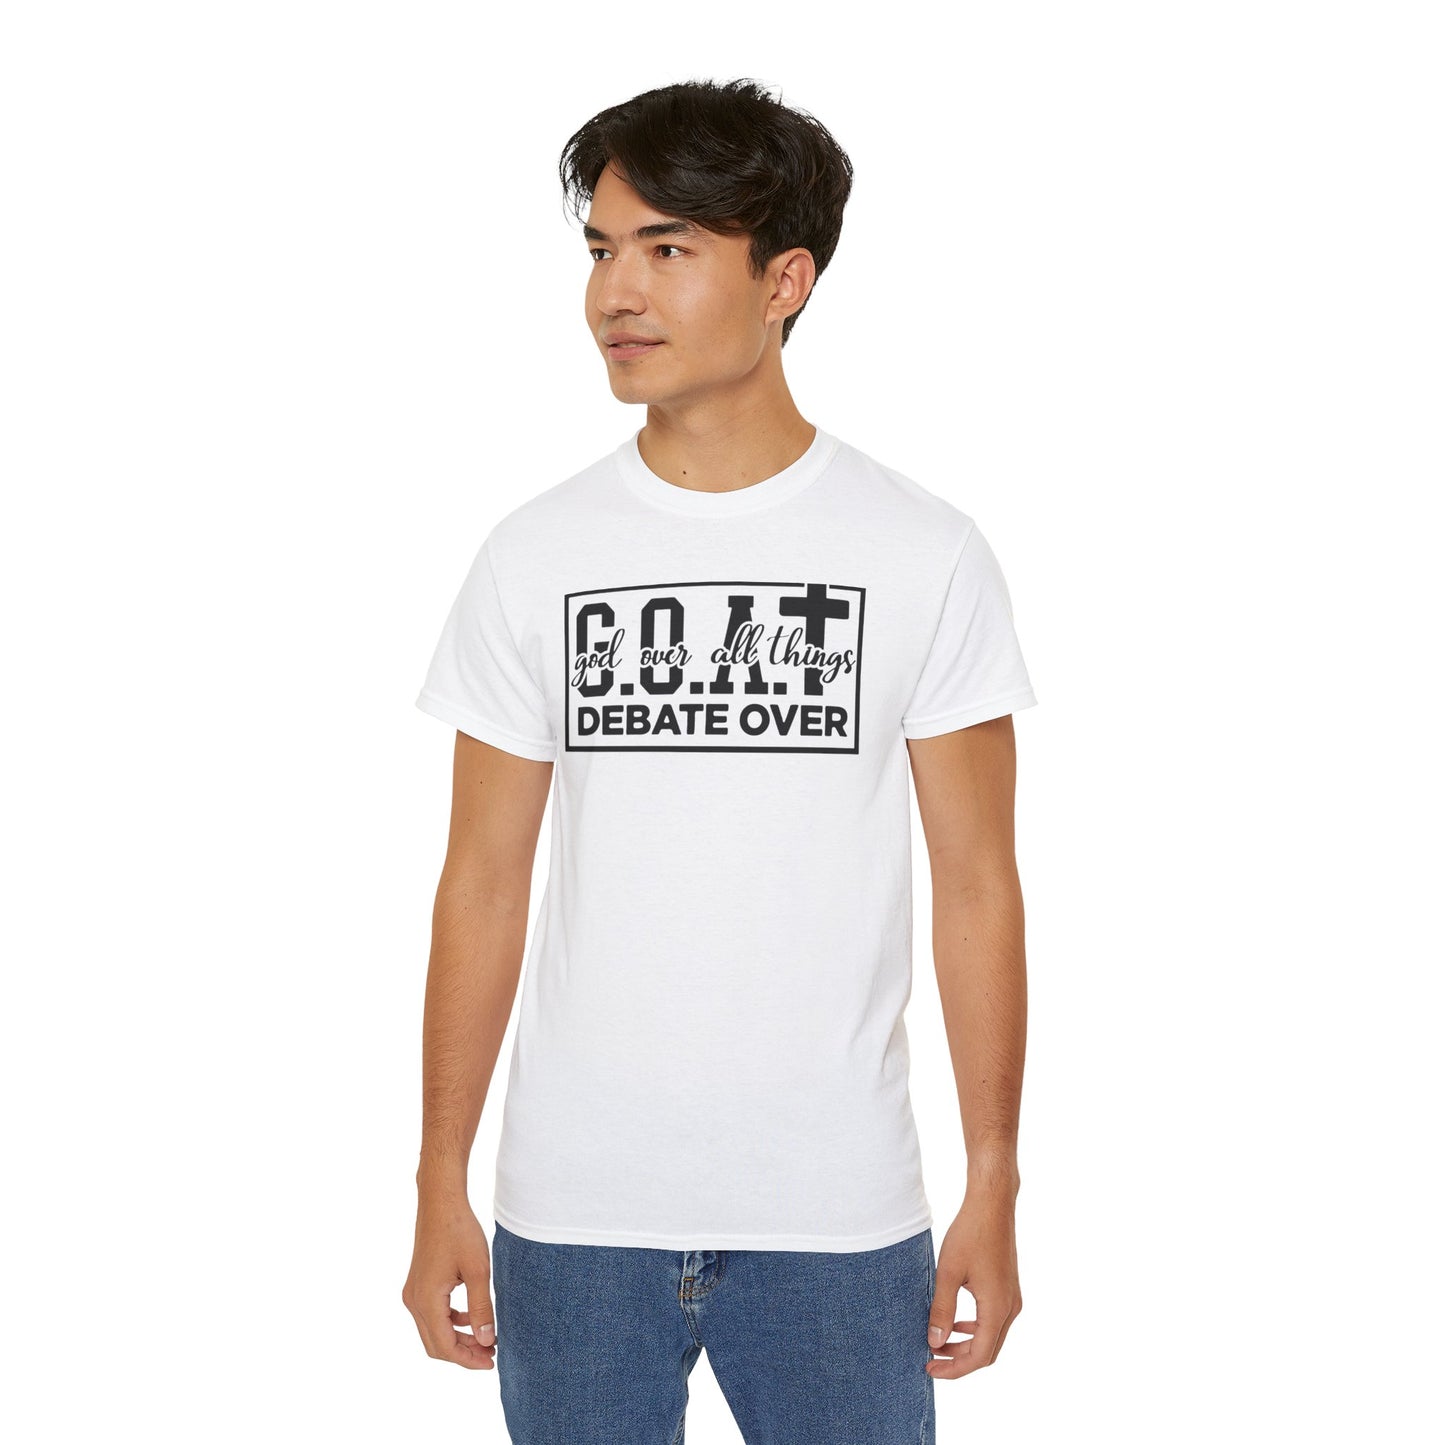 GOAT: GOD OVER ALL THINGS DEBATE OVER FUNNY Unisex Christian Ultra Cotton Tee Printify